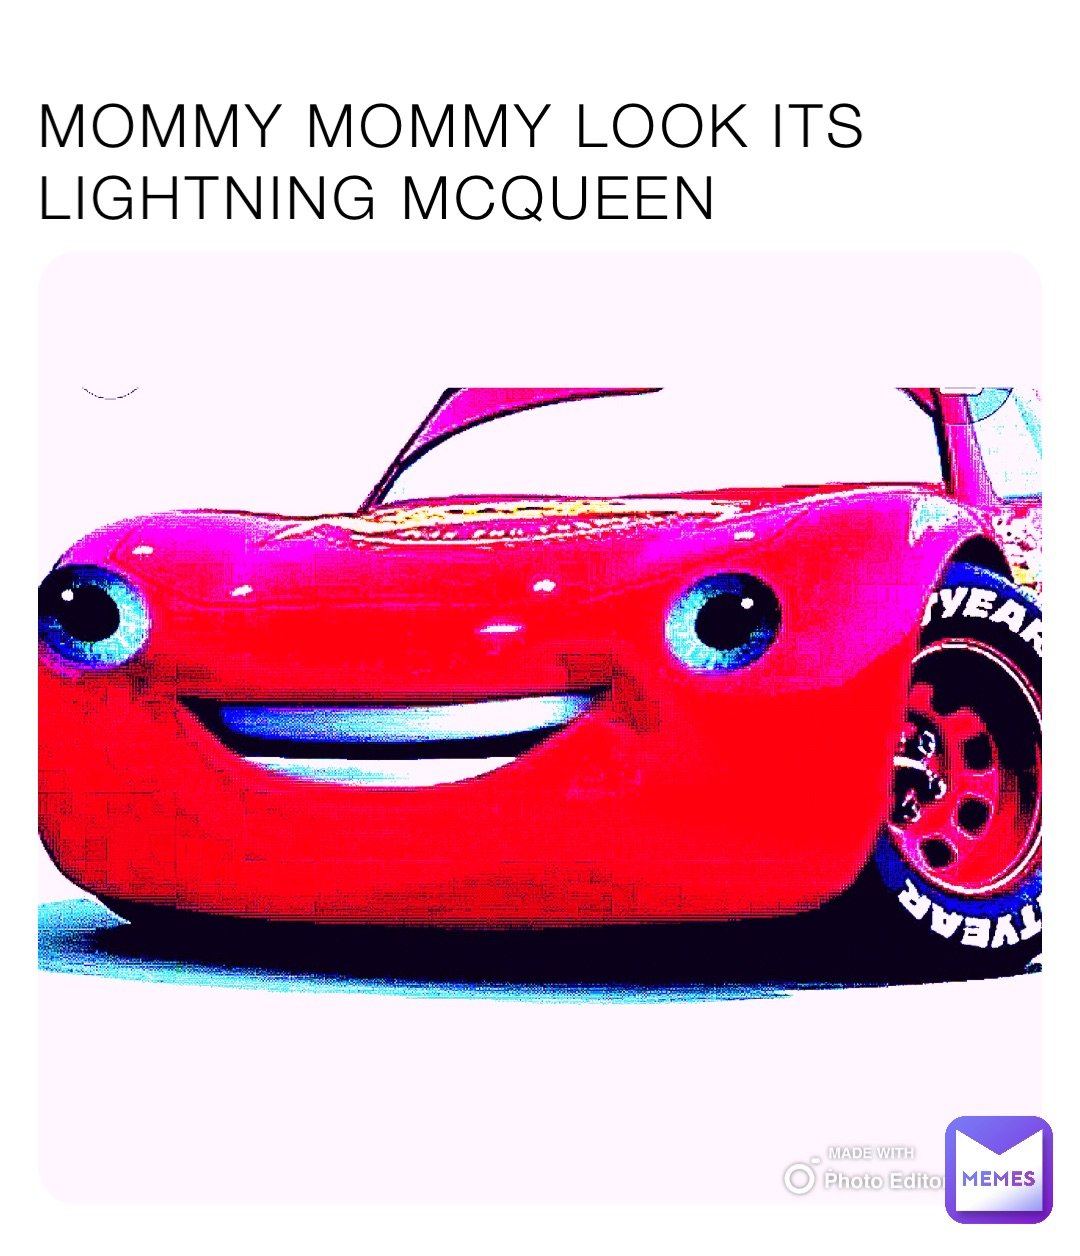 MOMMY MOMMY LOOK ITS LIGHTNING MCQUEEN